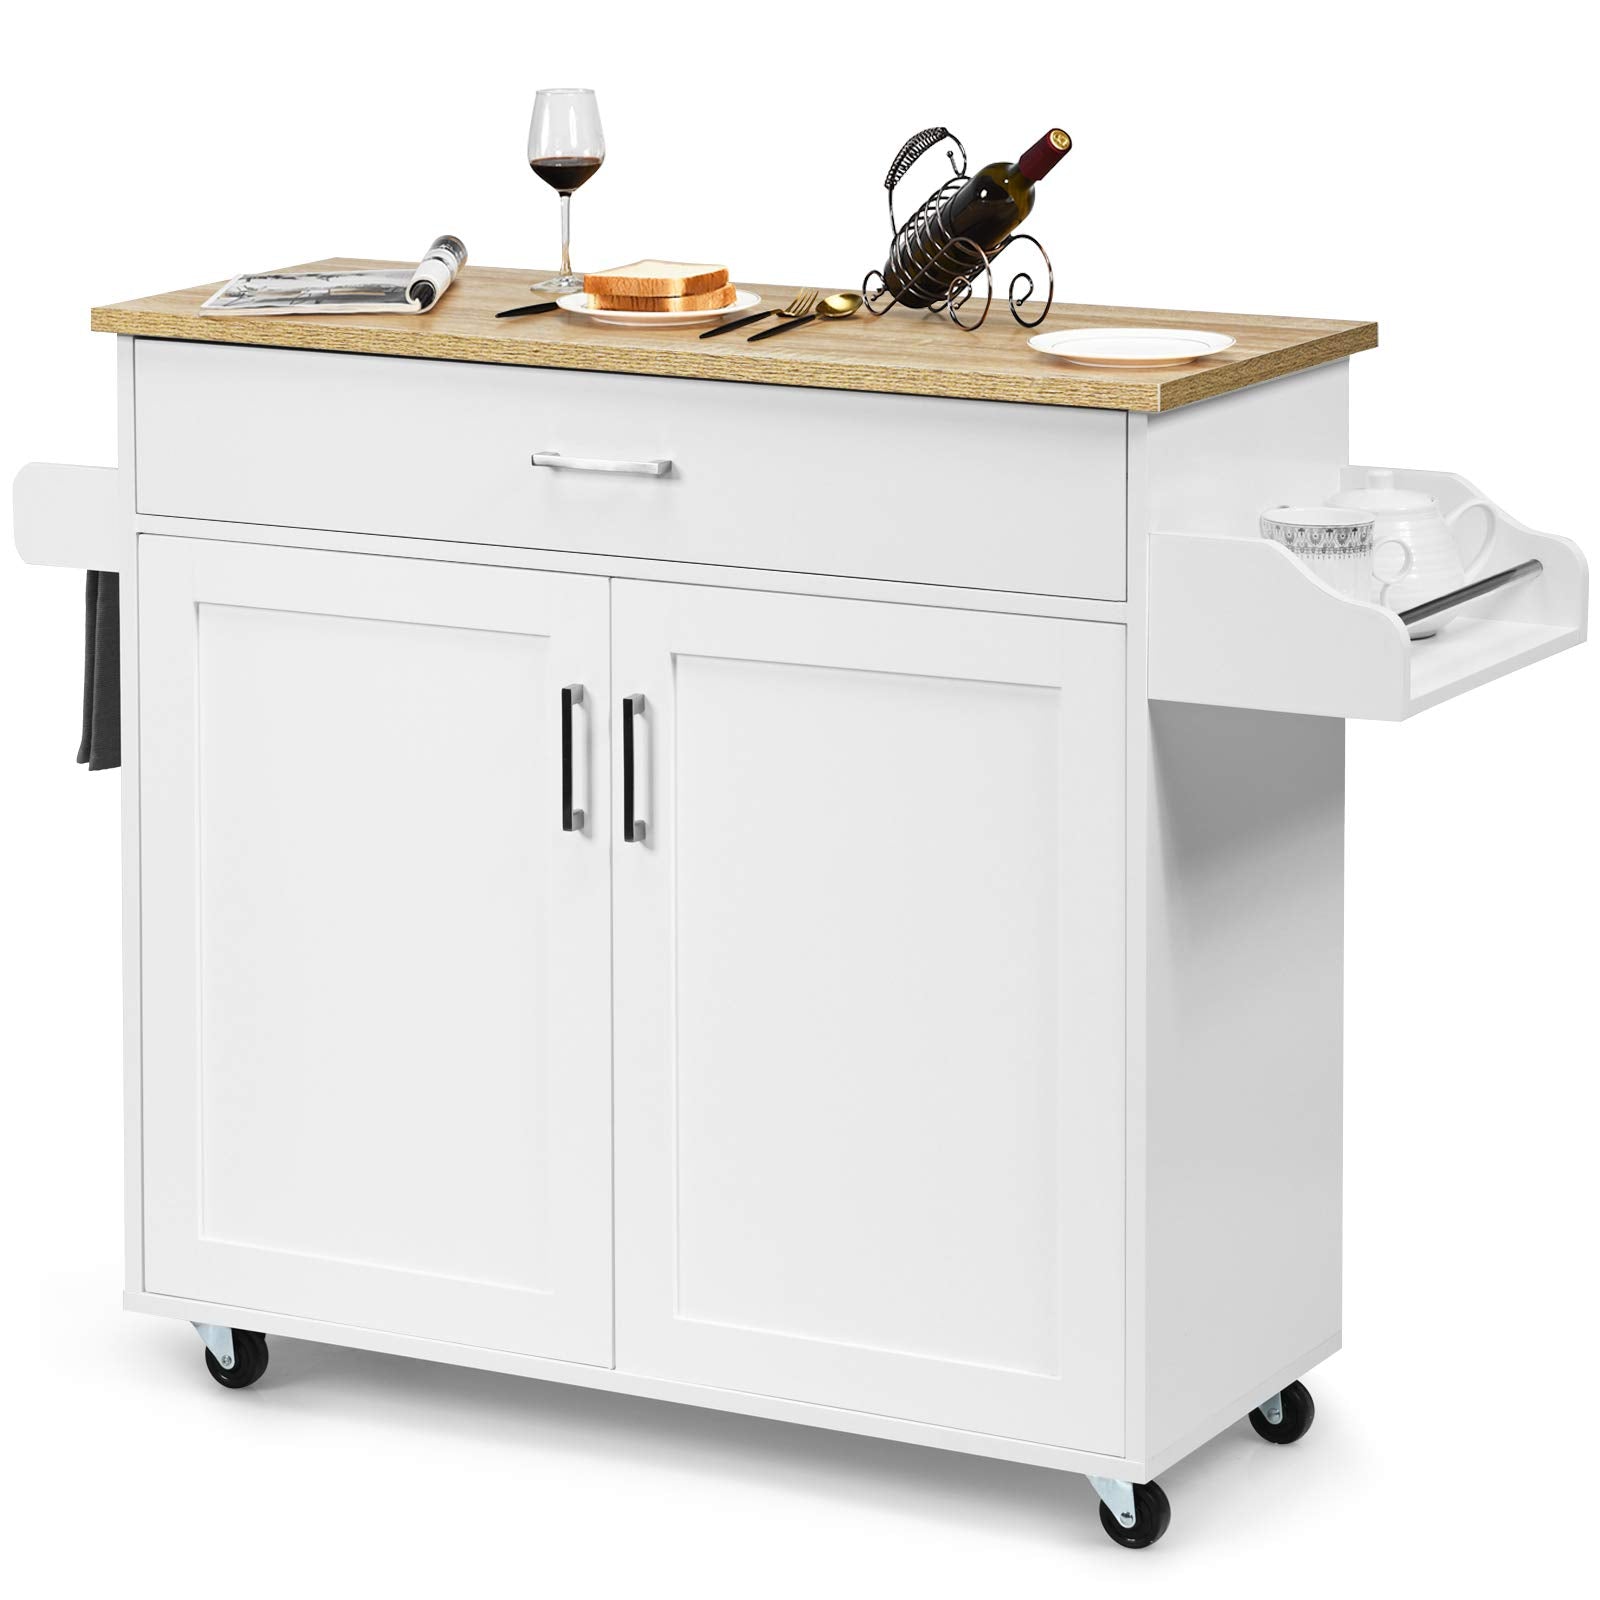 Giantex Kitchen Island, Rolling Kitchen Cart with Spice and Towel Rack, Large Drawer & 2-Door Storage Cabinet